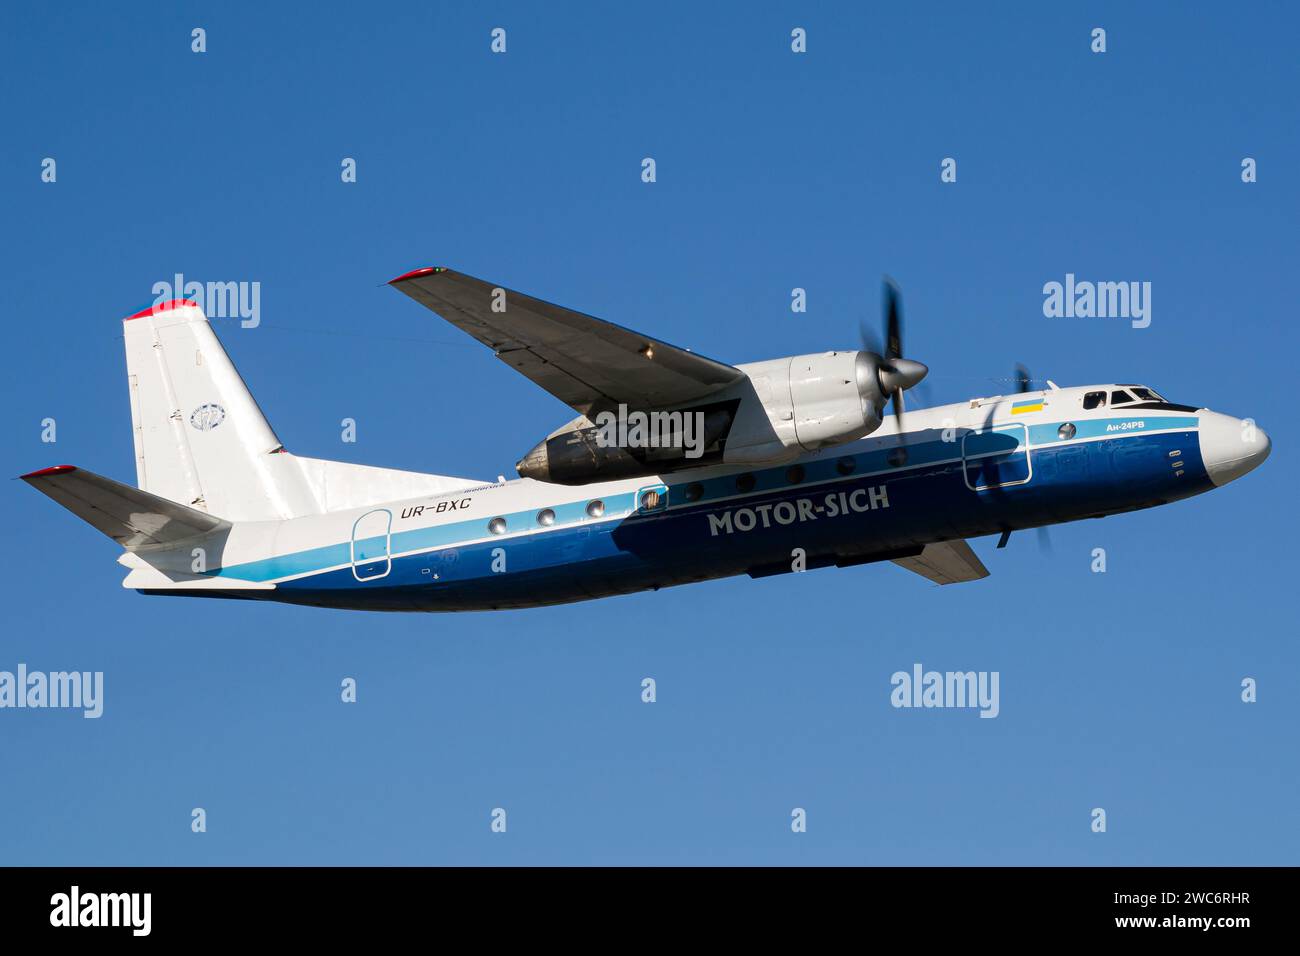 Ukrainian airline's Motor Sich Airlines Antonov An-24RV aircraft taking off from Lviv for a flight to Kyiv Stock Photo